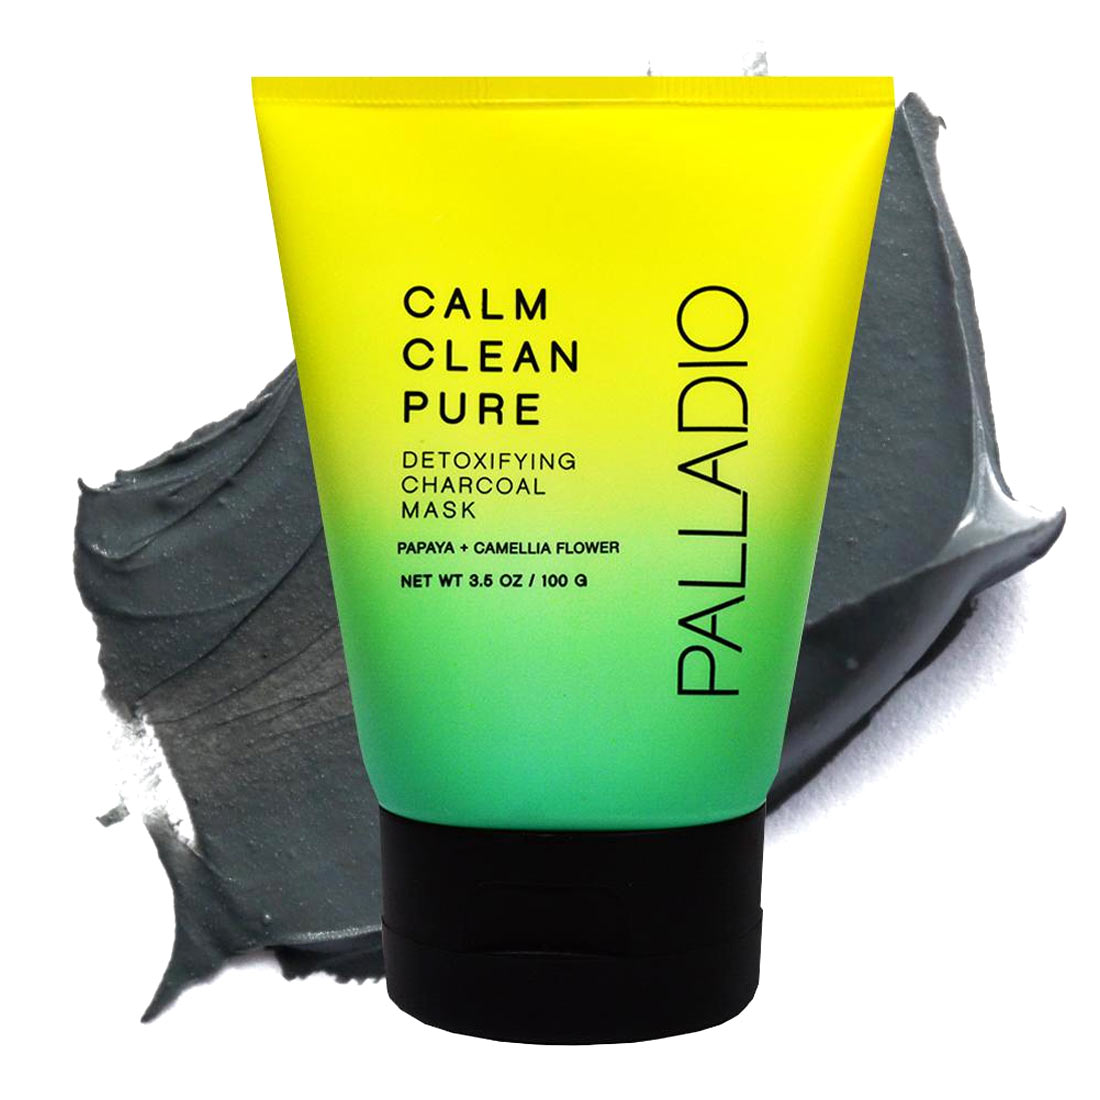 CALM CLEAN PURE DETOXIFYING CHARCOAL MASK